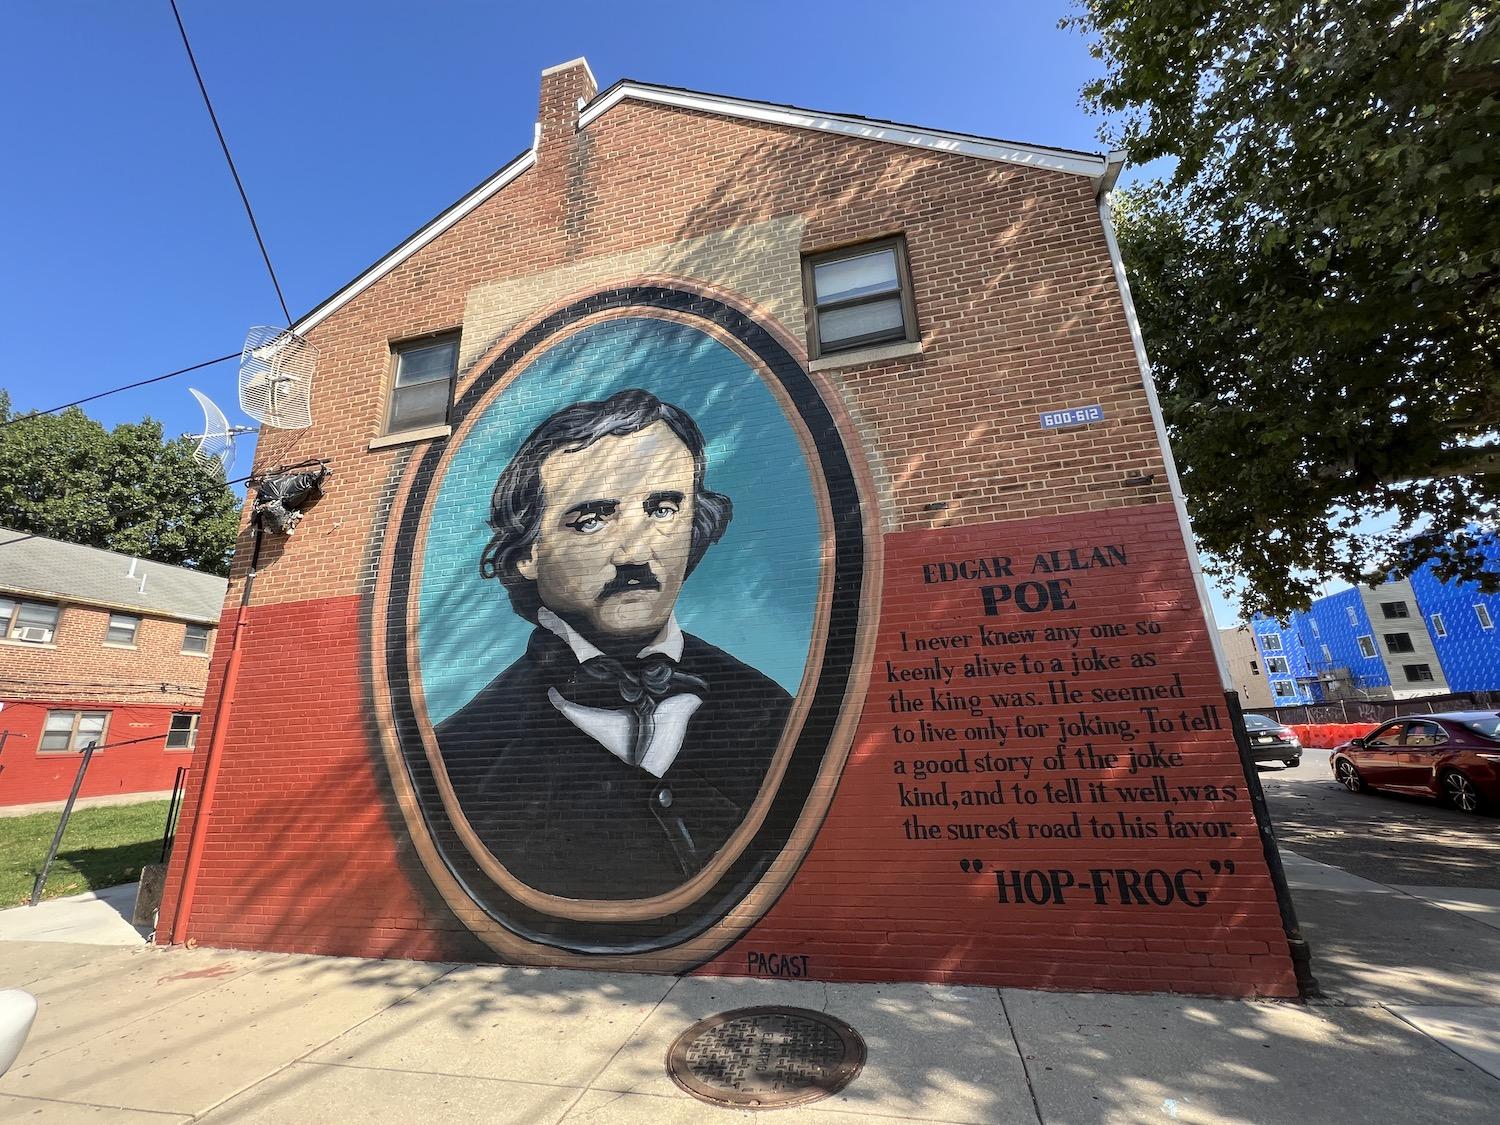 This mural of Edgar Allan Poe is on private property a block away from the national historic site.